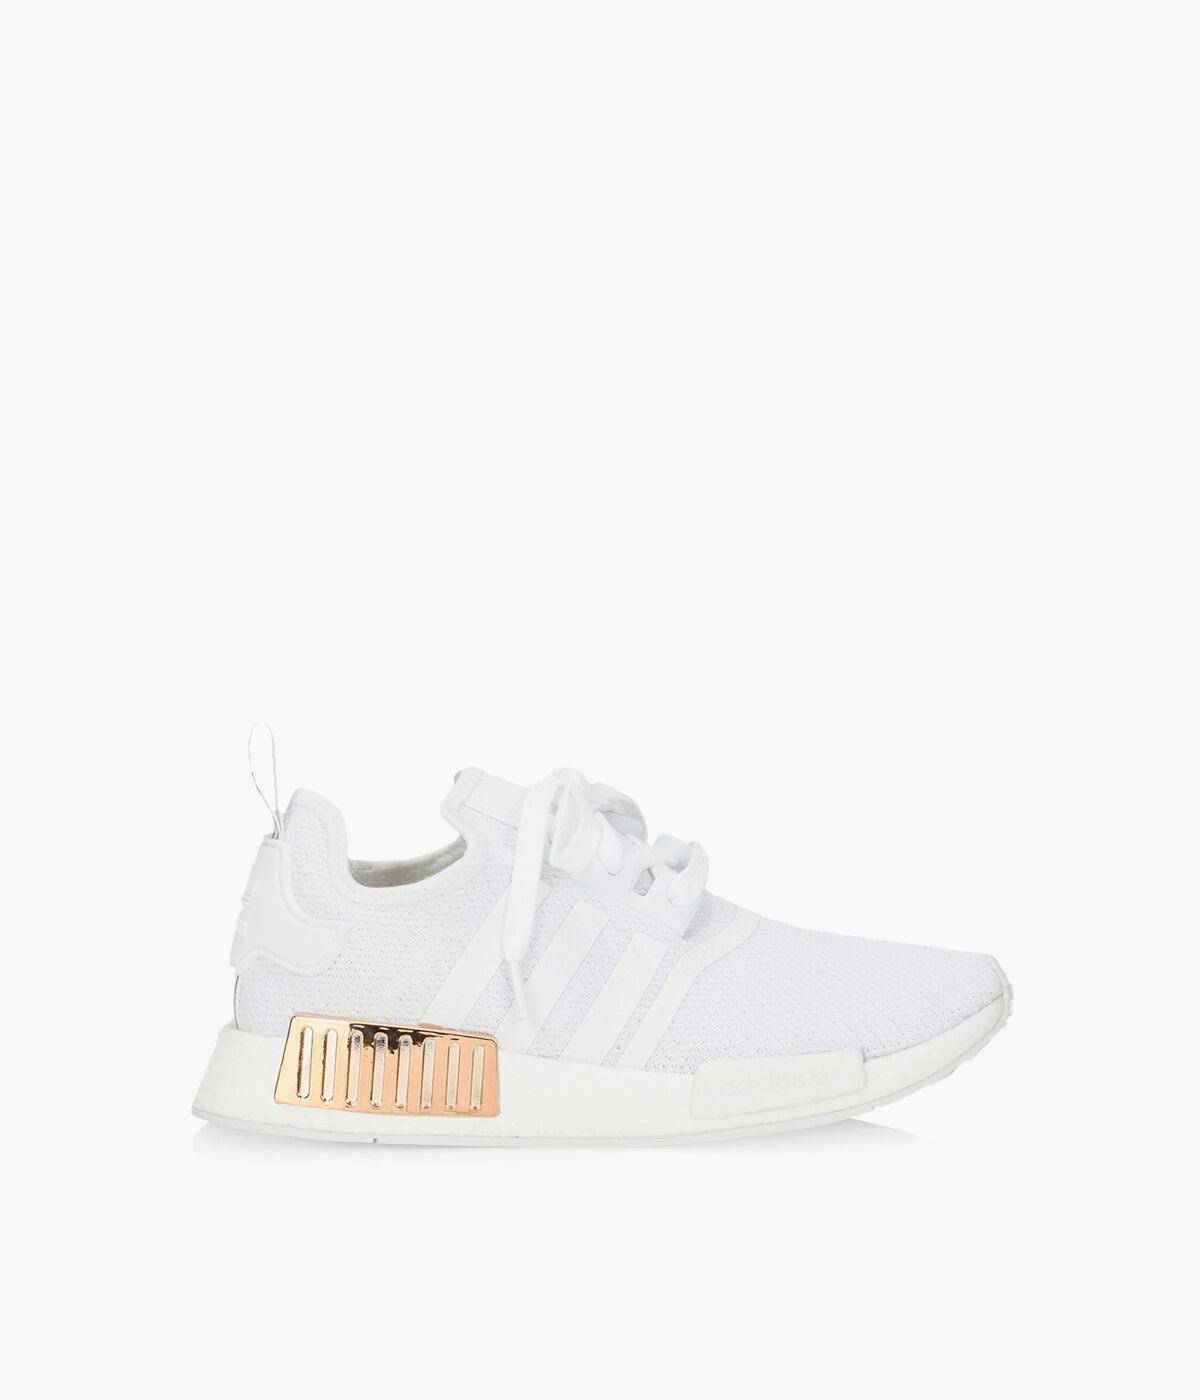 ADIDAS NMD R 1 W - Fabric | Browns Shoes